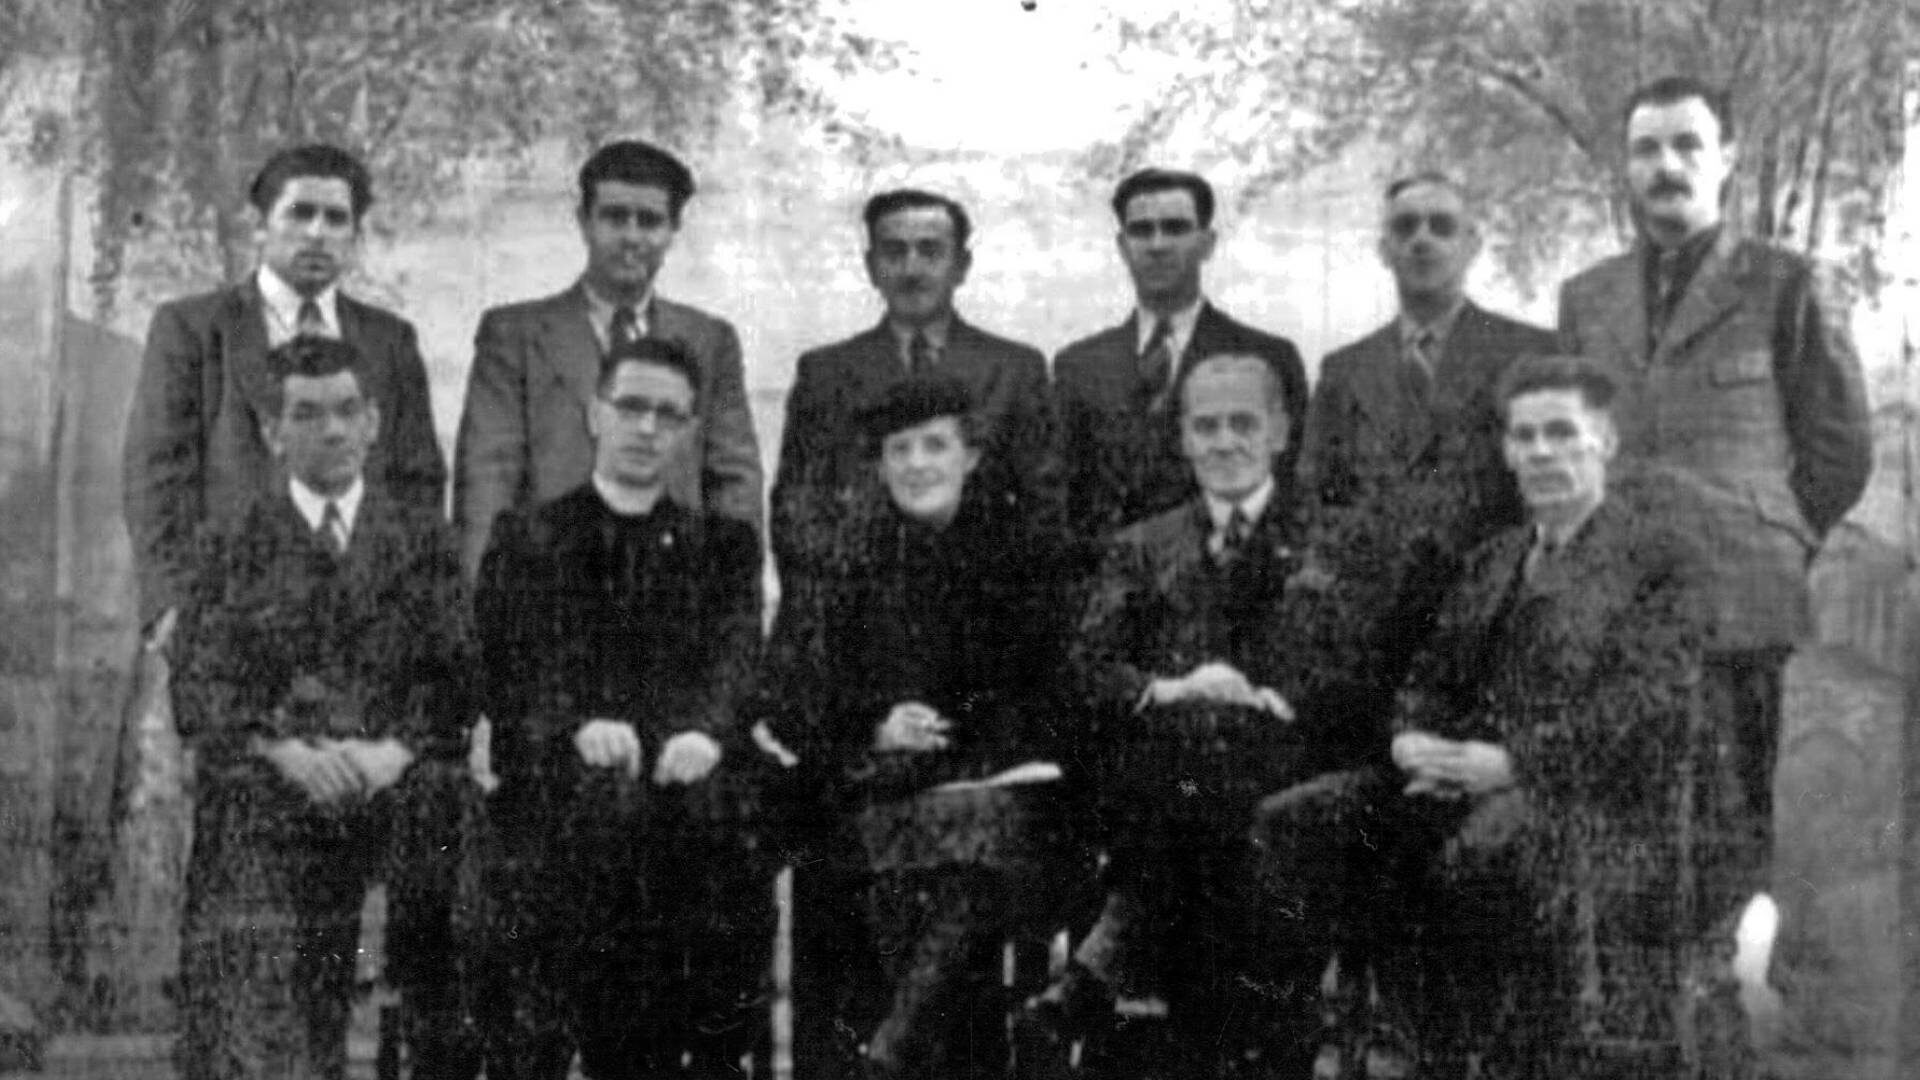 Evacuees from Gibraltar formed a committee at Camp no. 2, Cargagh near Downpatrick, Co. Down. This committee responsible for evacuees' welfare as well as organising concerts and social events included John Martinez Sr. and Captain and Mrs. Bateman-Fox.